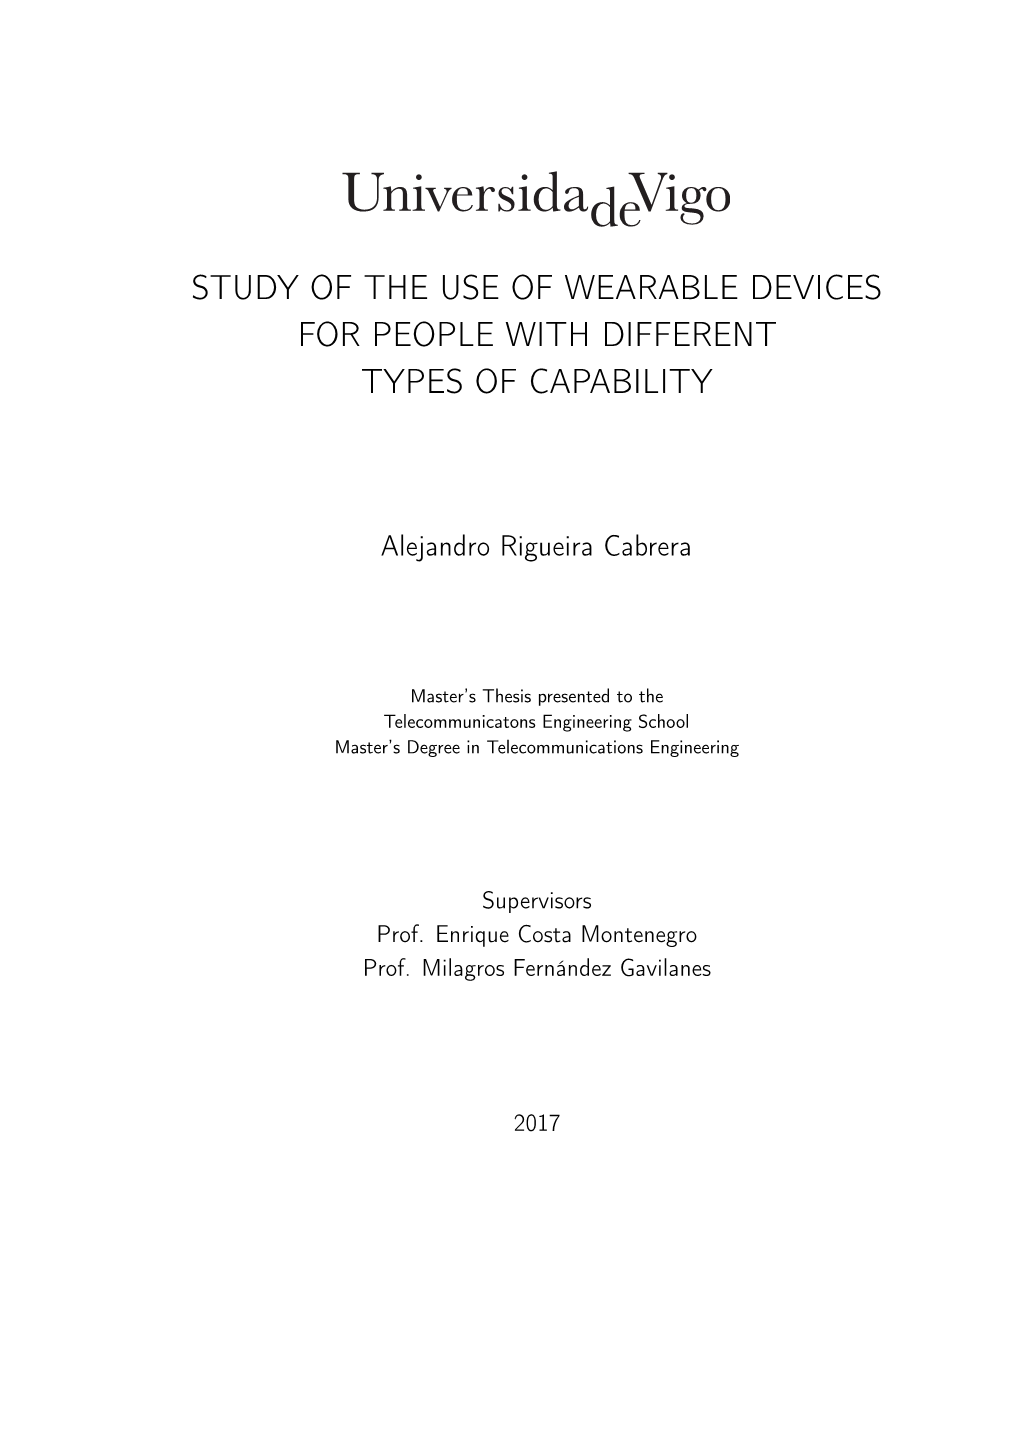 Study of the Use of Wearable Devices for People with Different Types of Capability